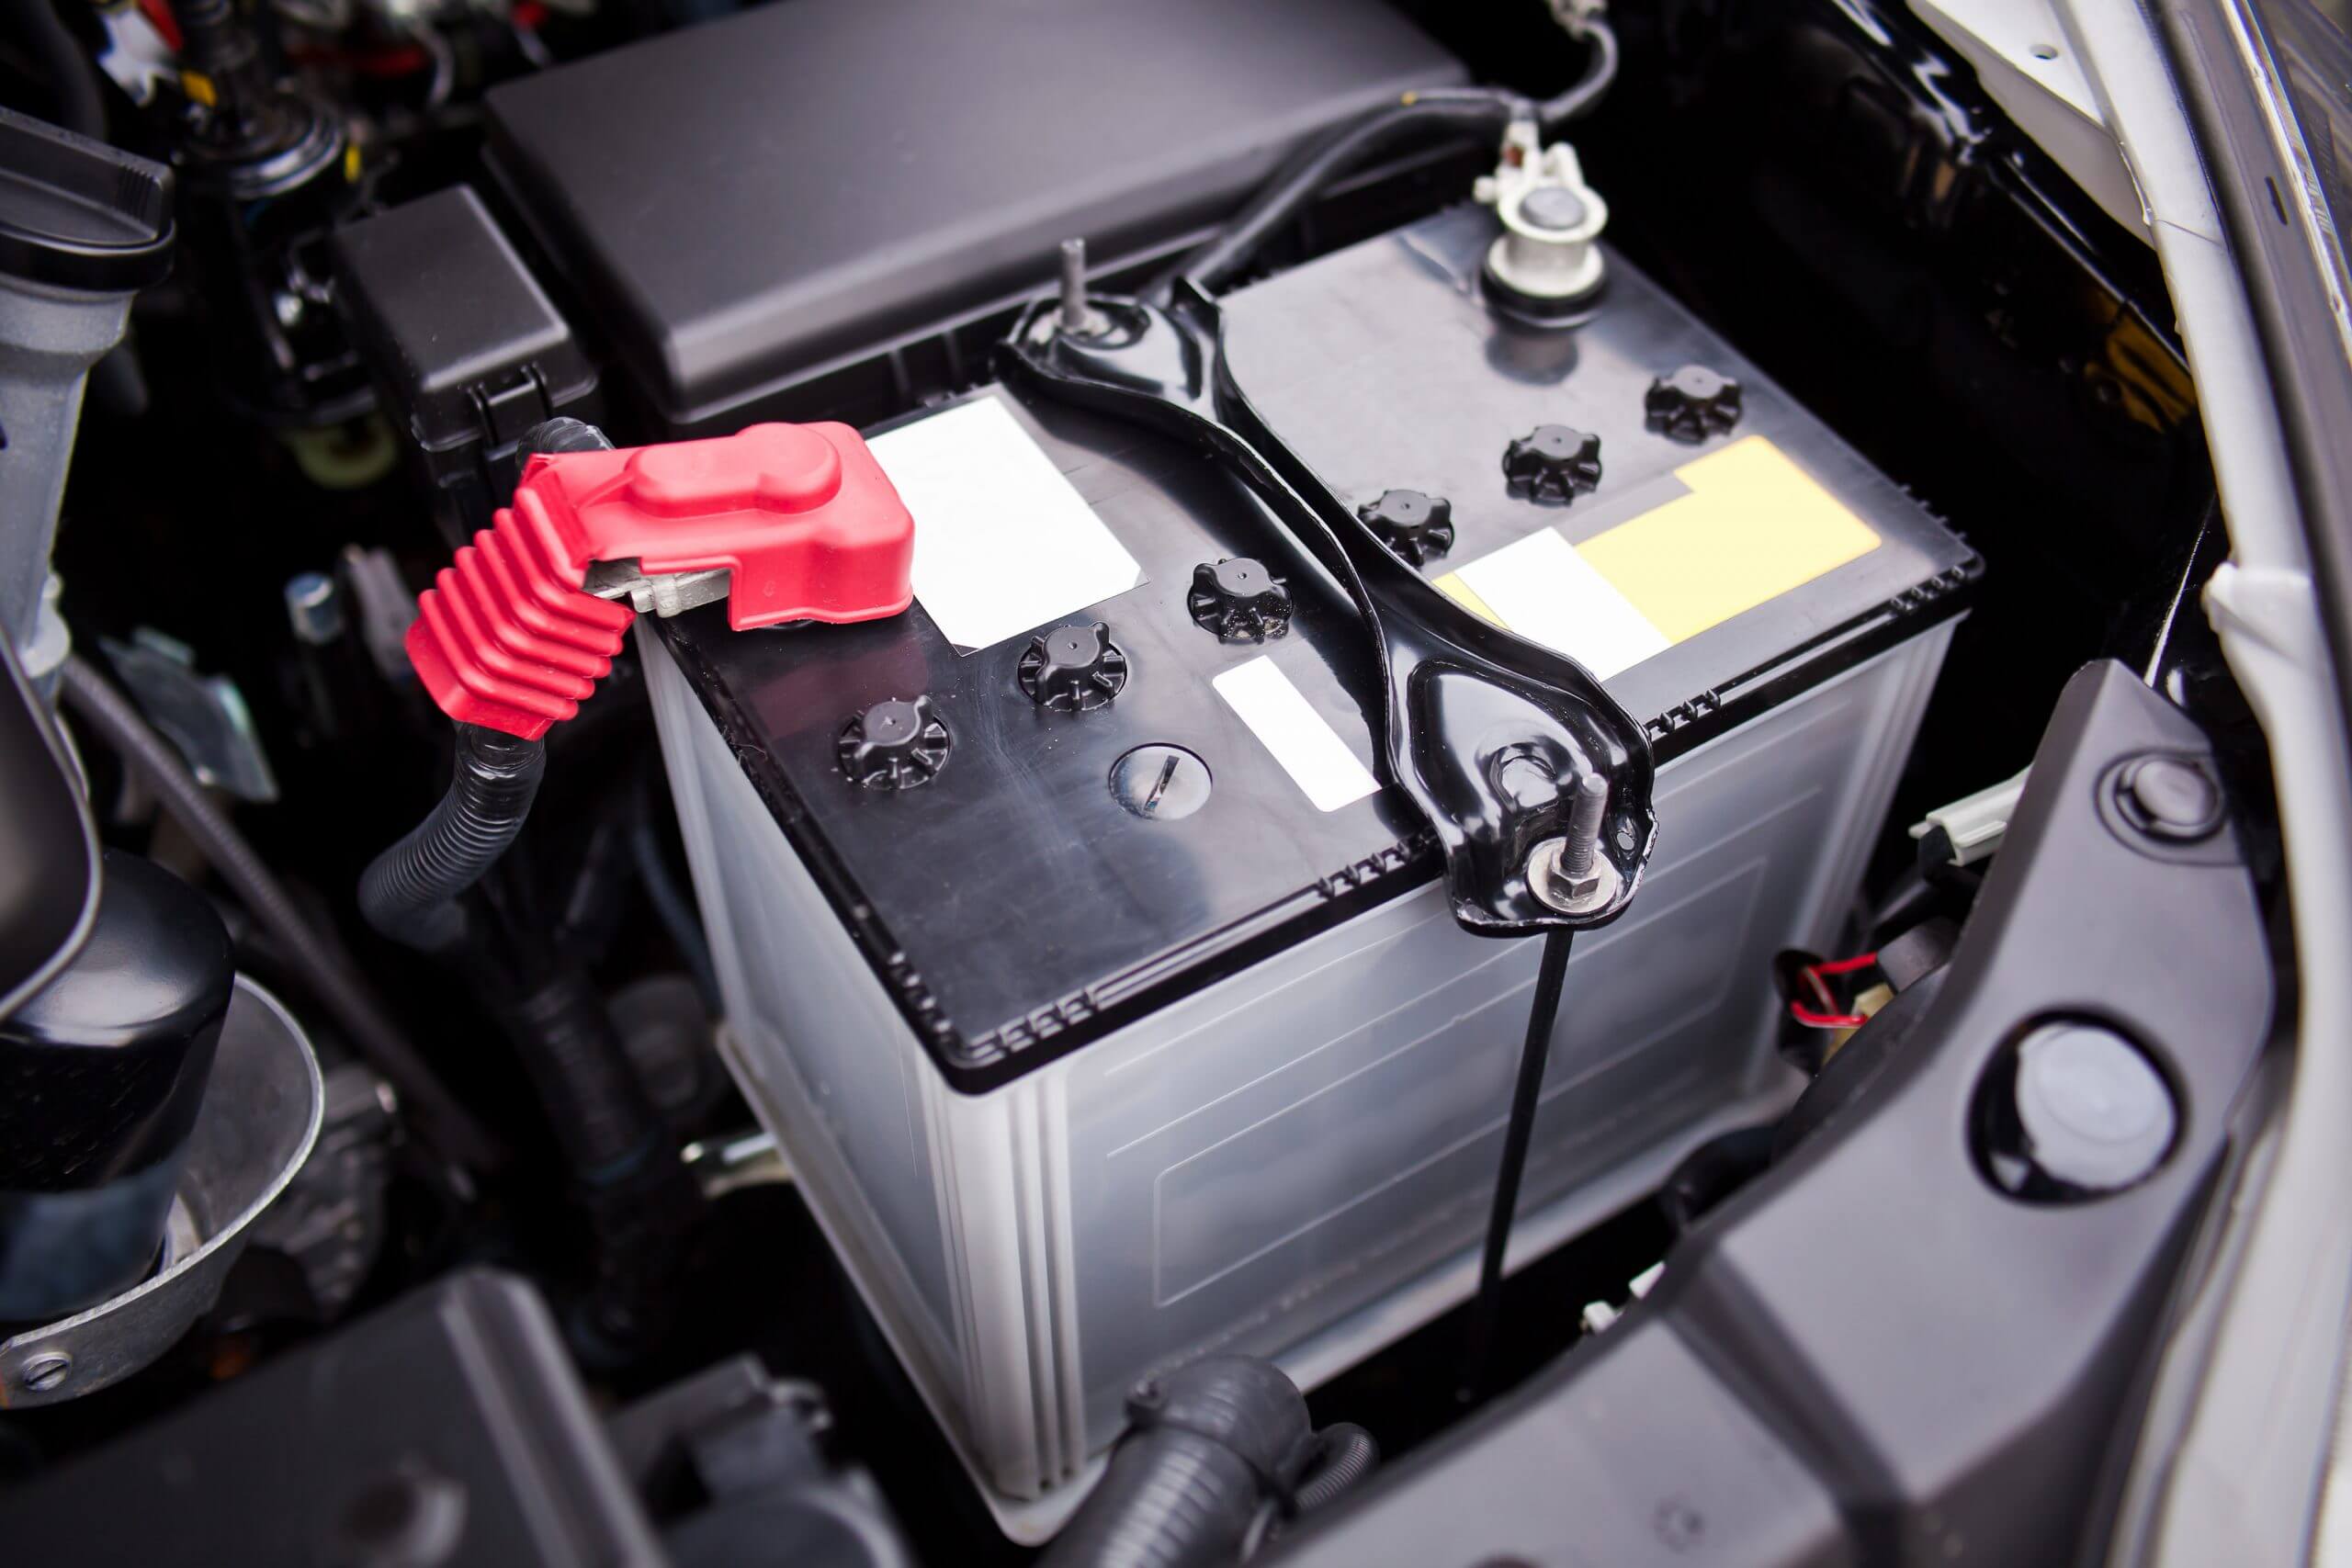 Battery installed near the М8 motor in SUV.